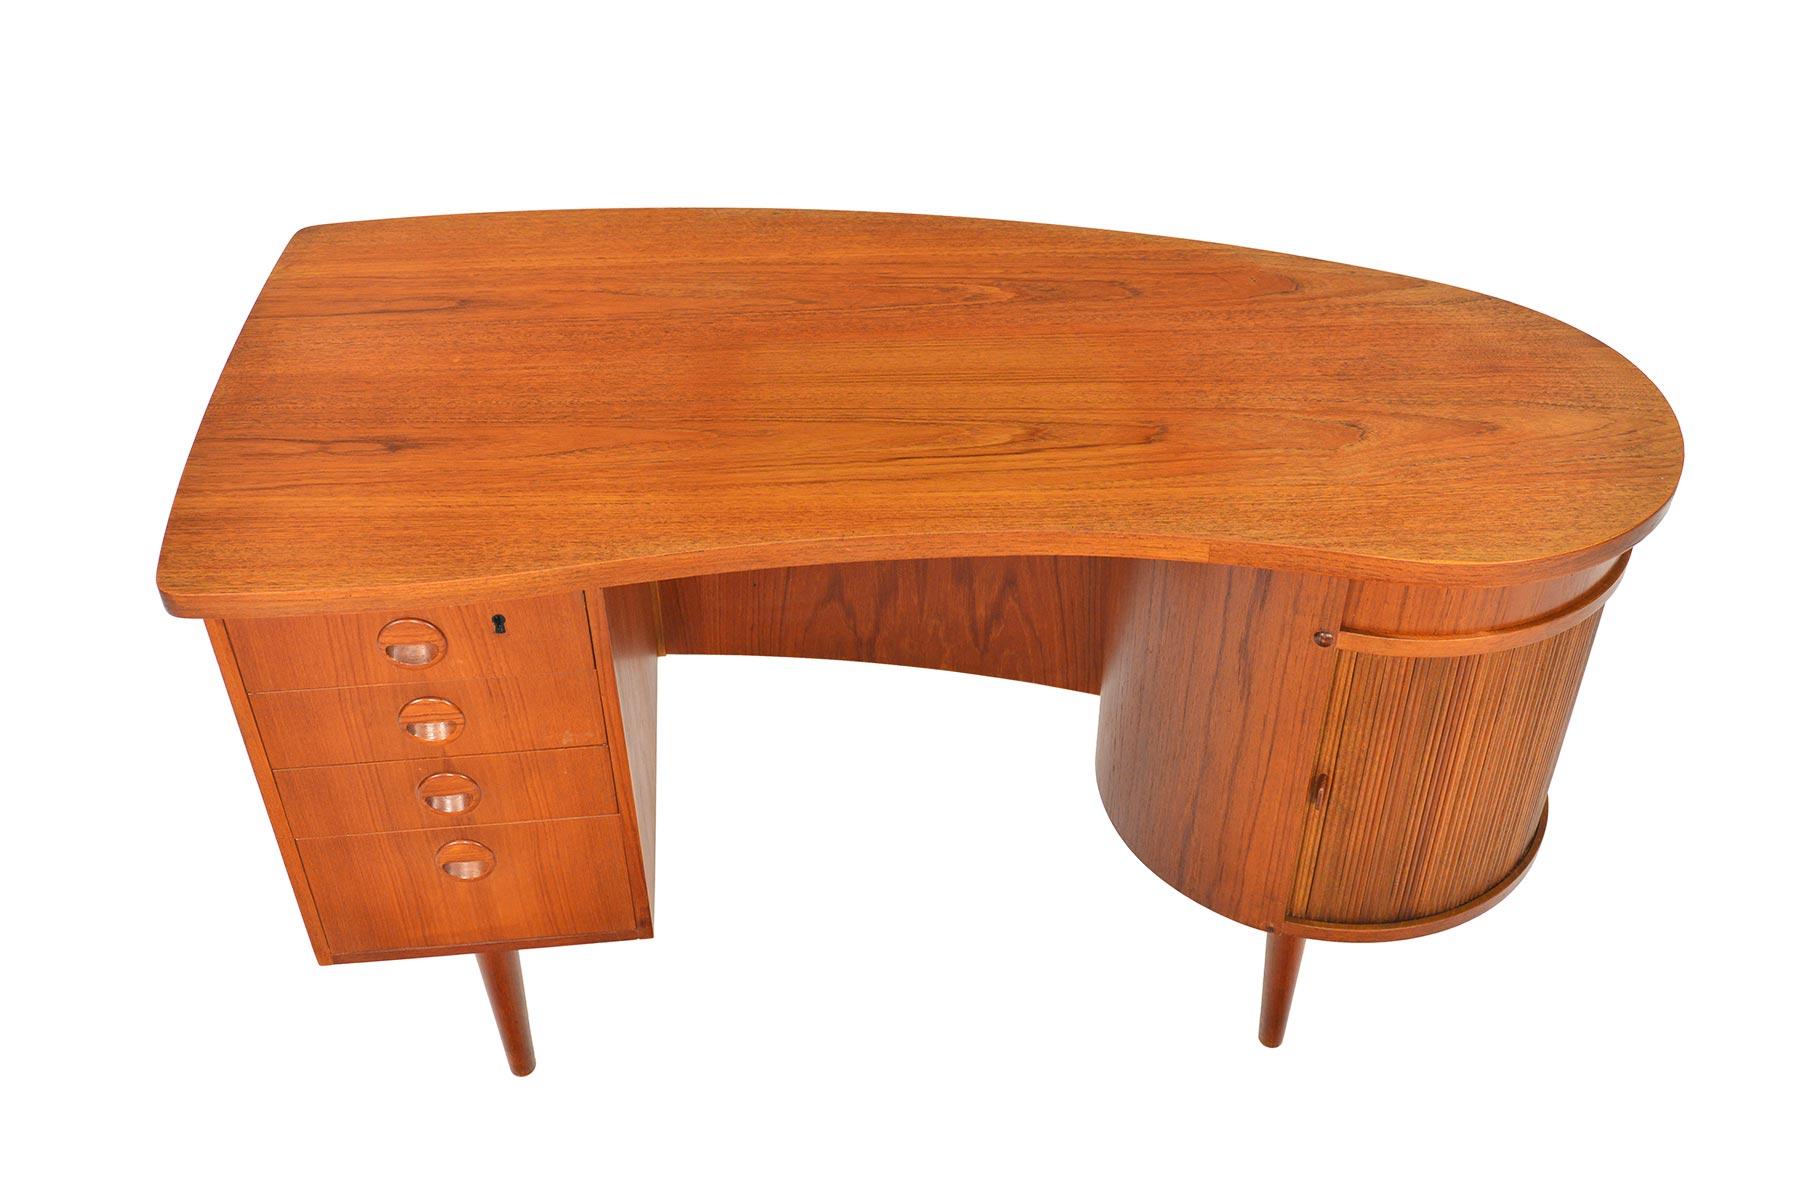 This rare Danish modern Model 54 executive desk was designed by Kai Kristiansen for Feldballes Mobelfabrik in the 1960s. Crafted in teak, this desk features a bank of four drawers with Kristiansen’s distinctive eyebrow shaped drawer pulls, bookshelf